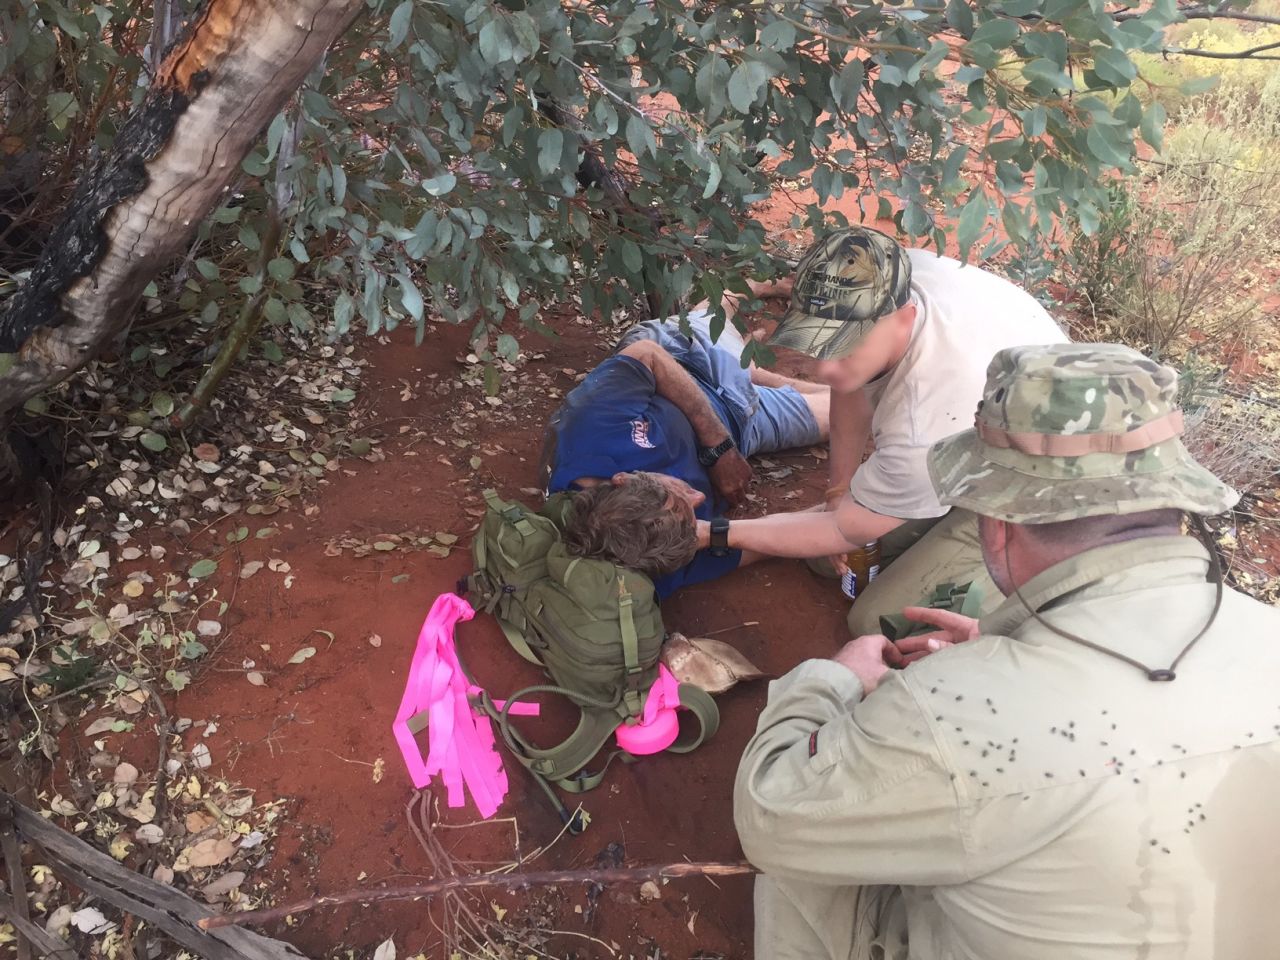 A hunter survived six days without water in a huge Australian desert by eating black ants, police said.